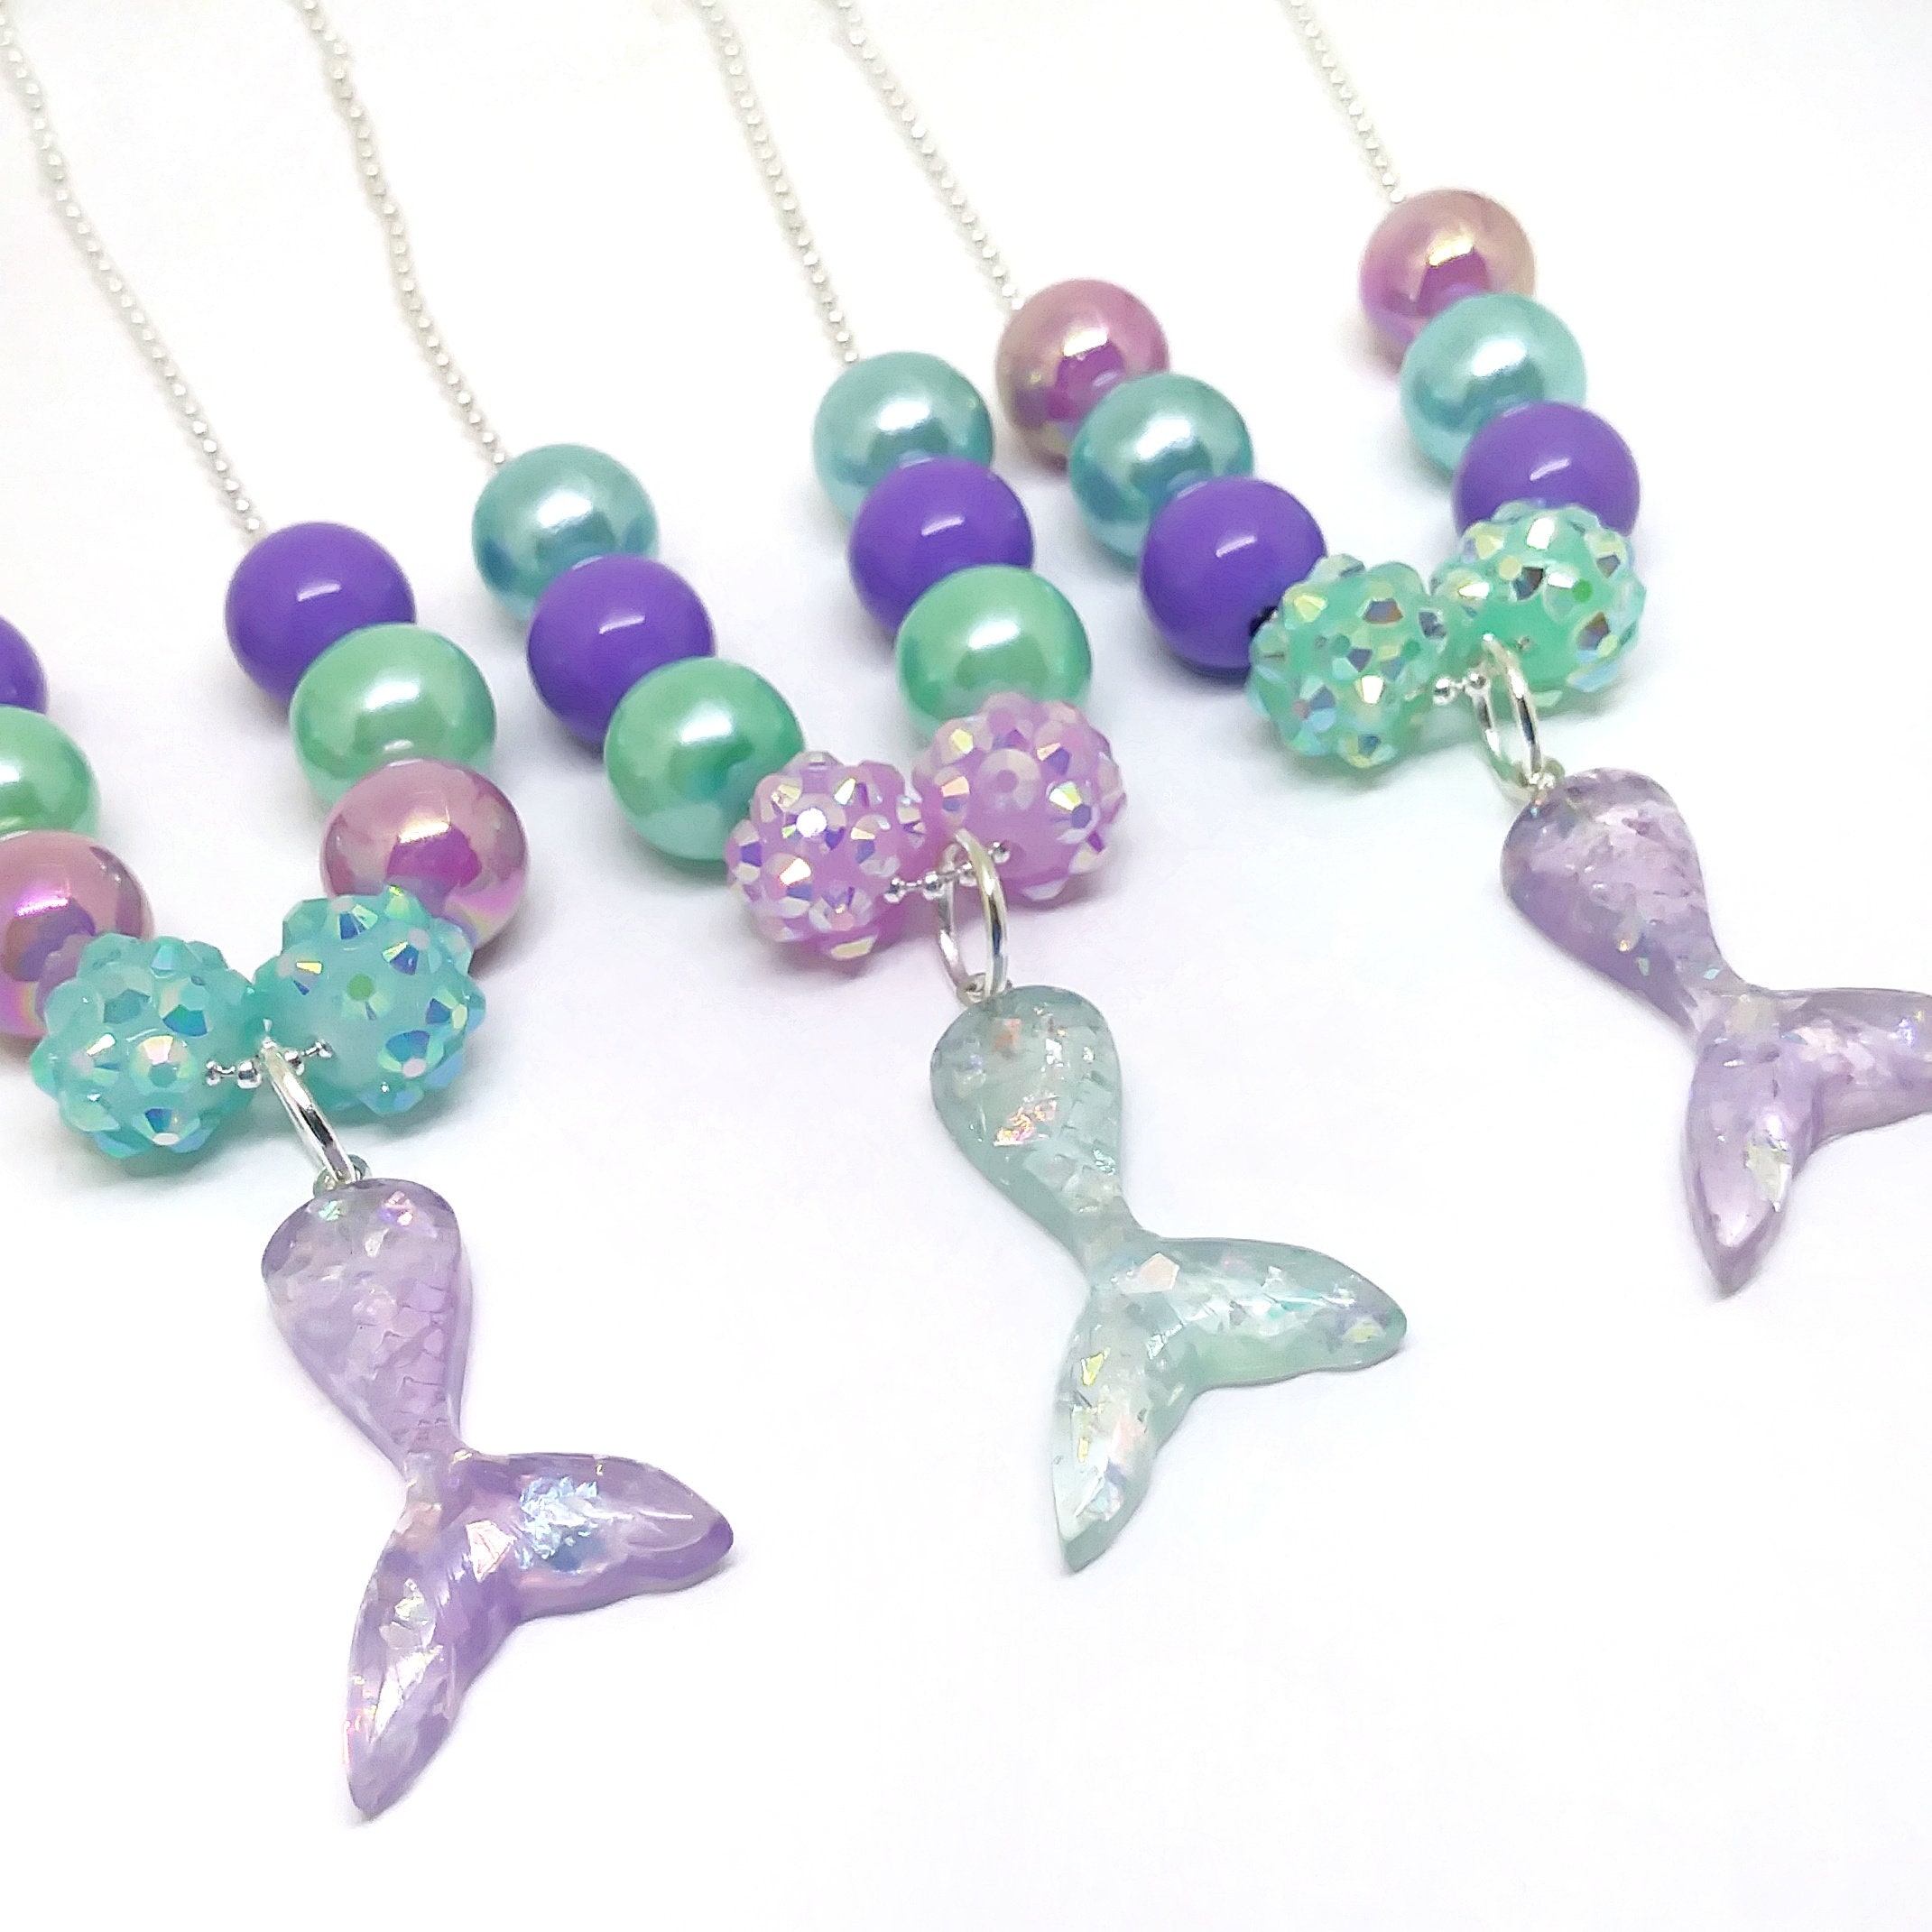 Mermaid Party Favors Supplies Kit, 75pack Mermaid Tail Necklace